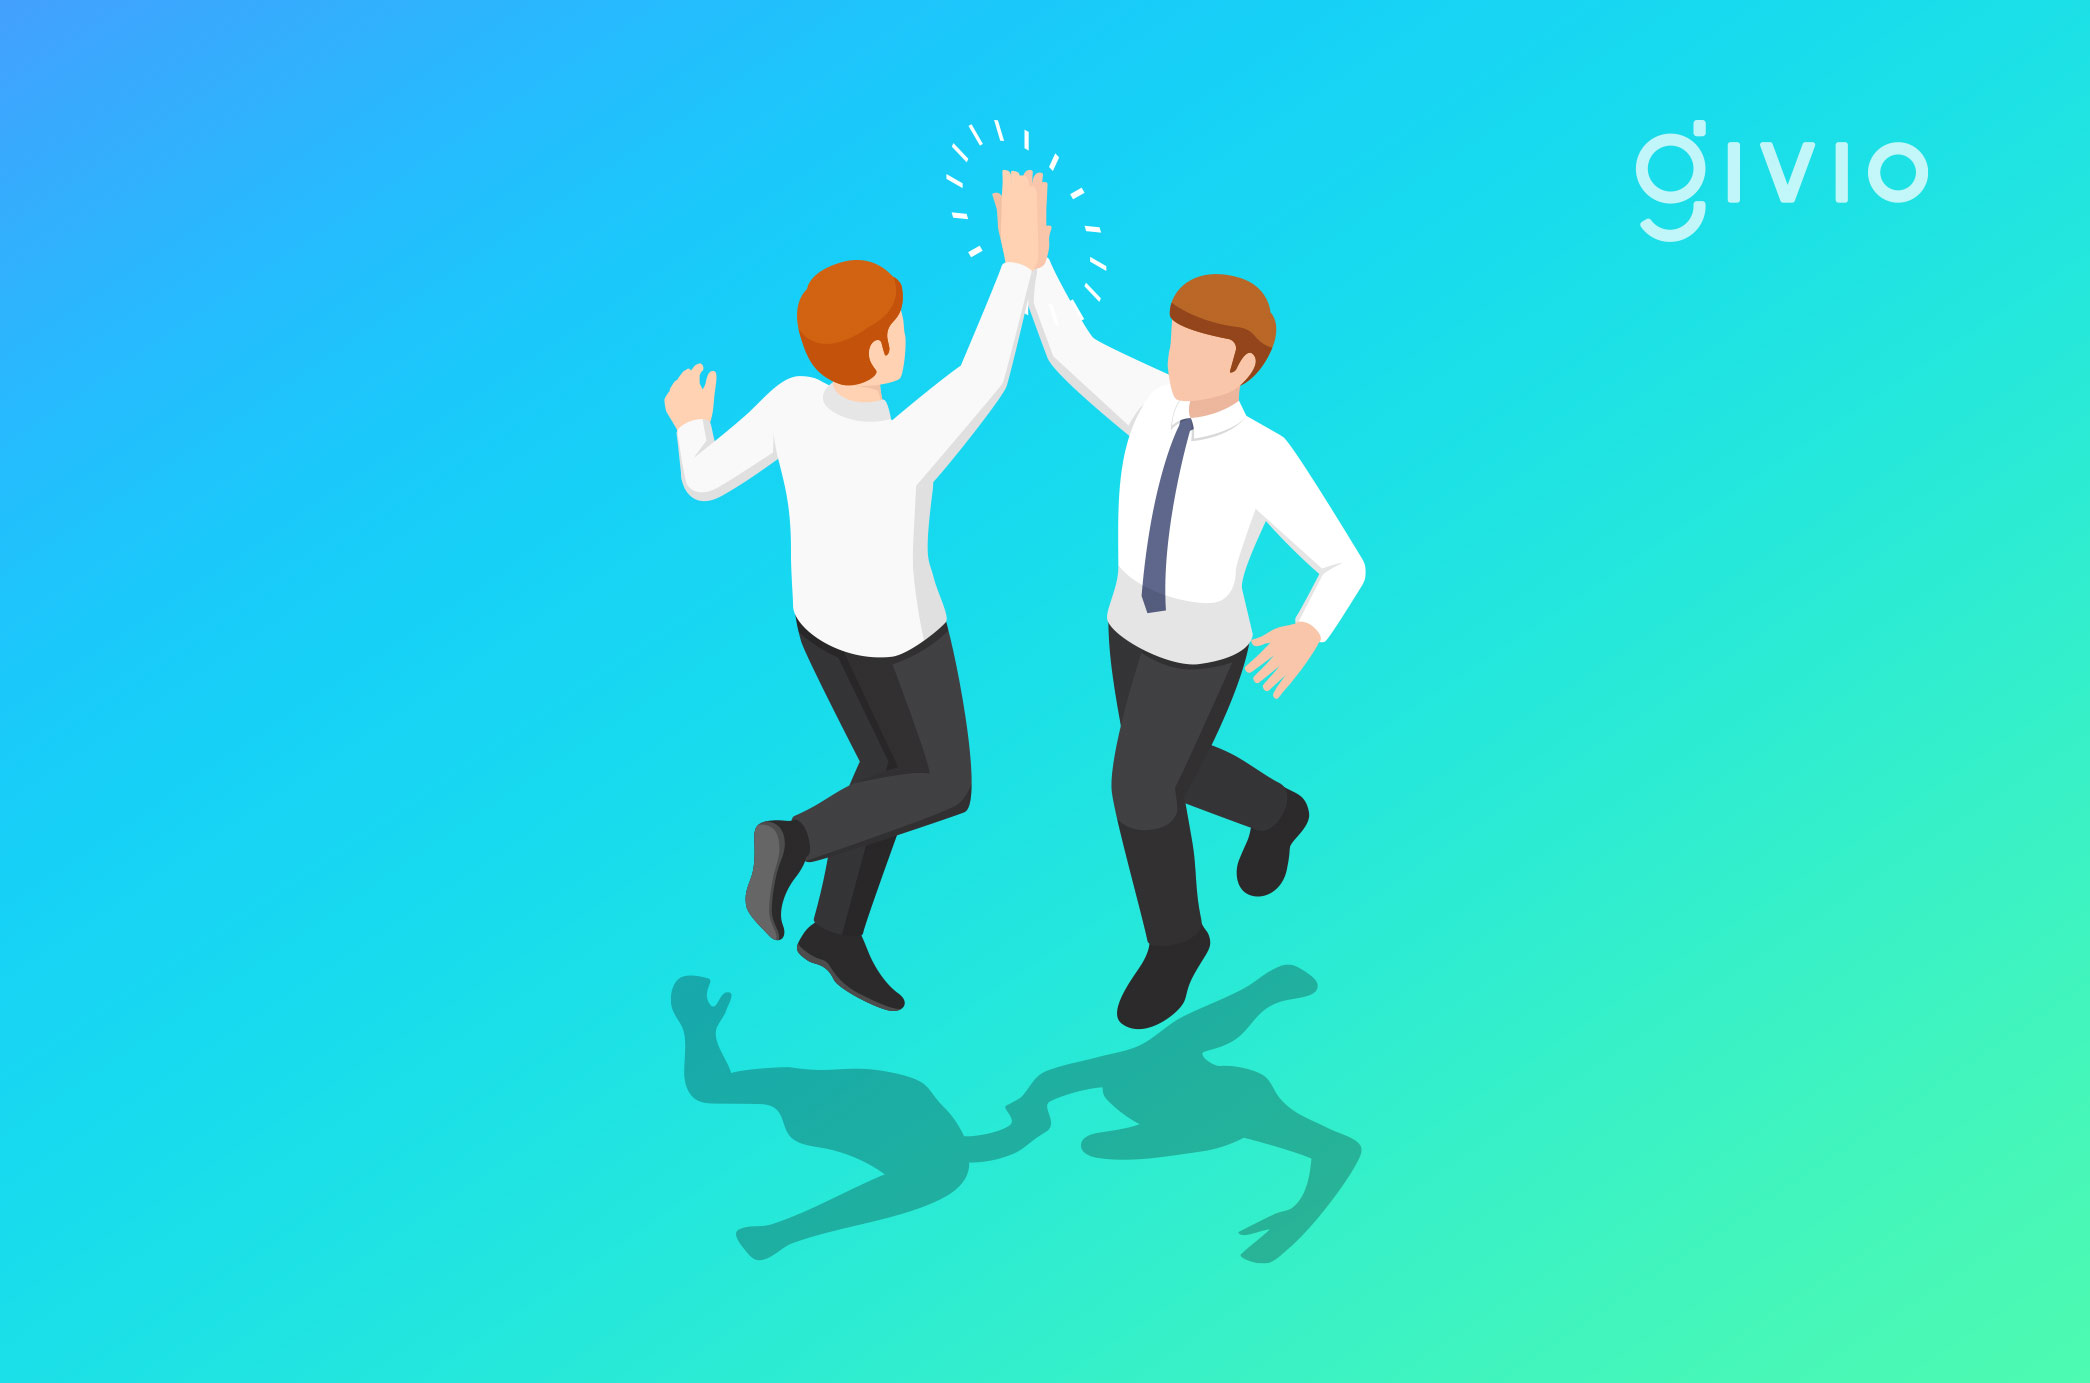 Illustration of co-workers jumping up for a high-five